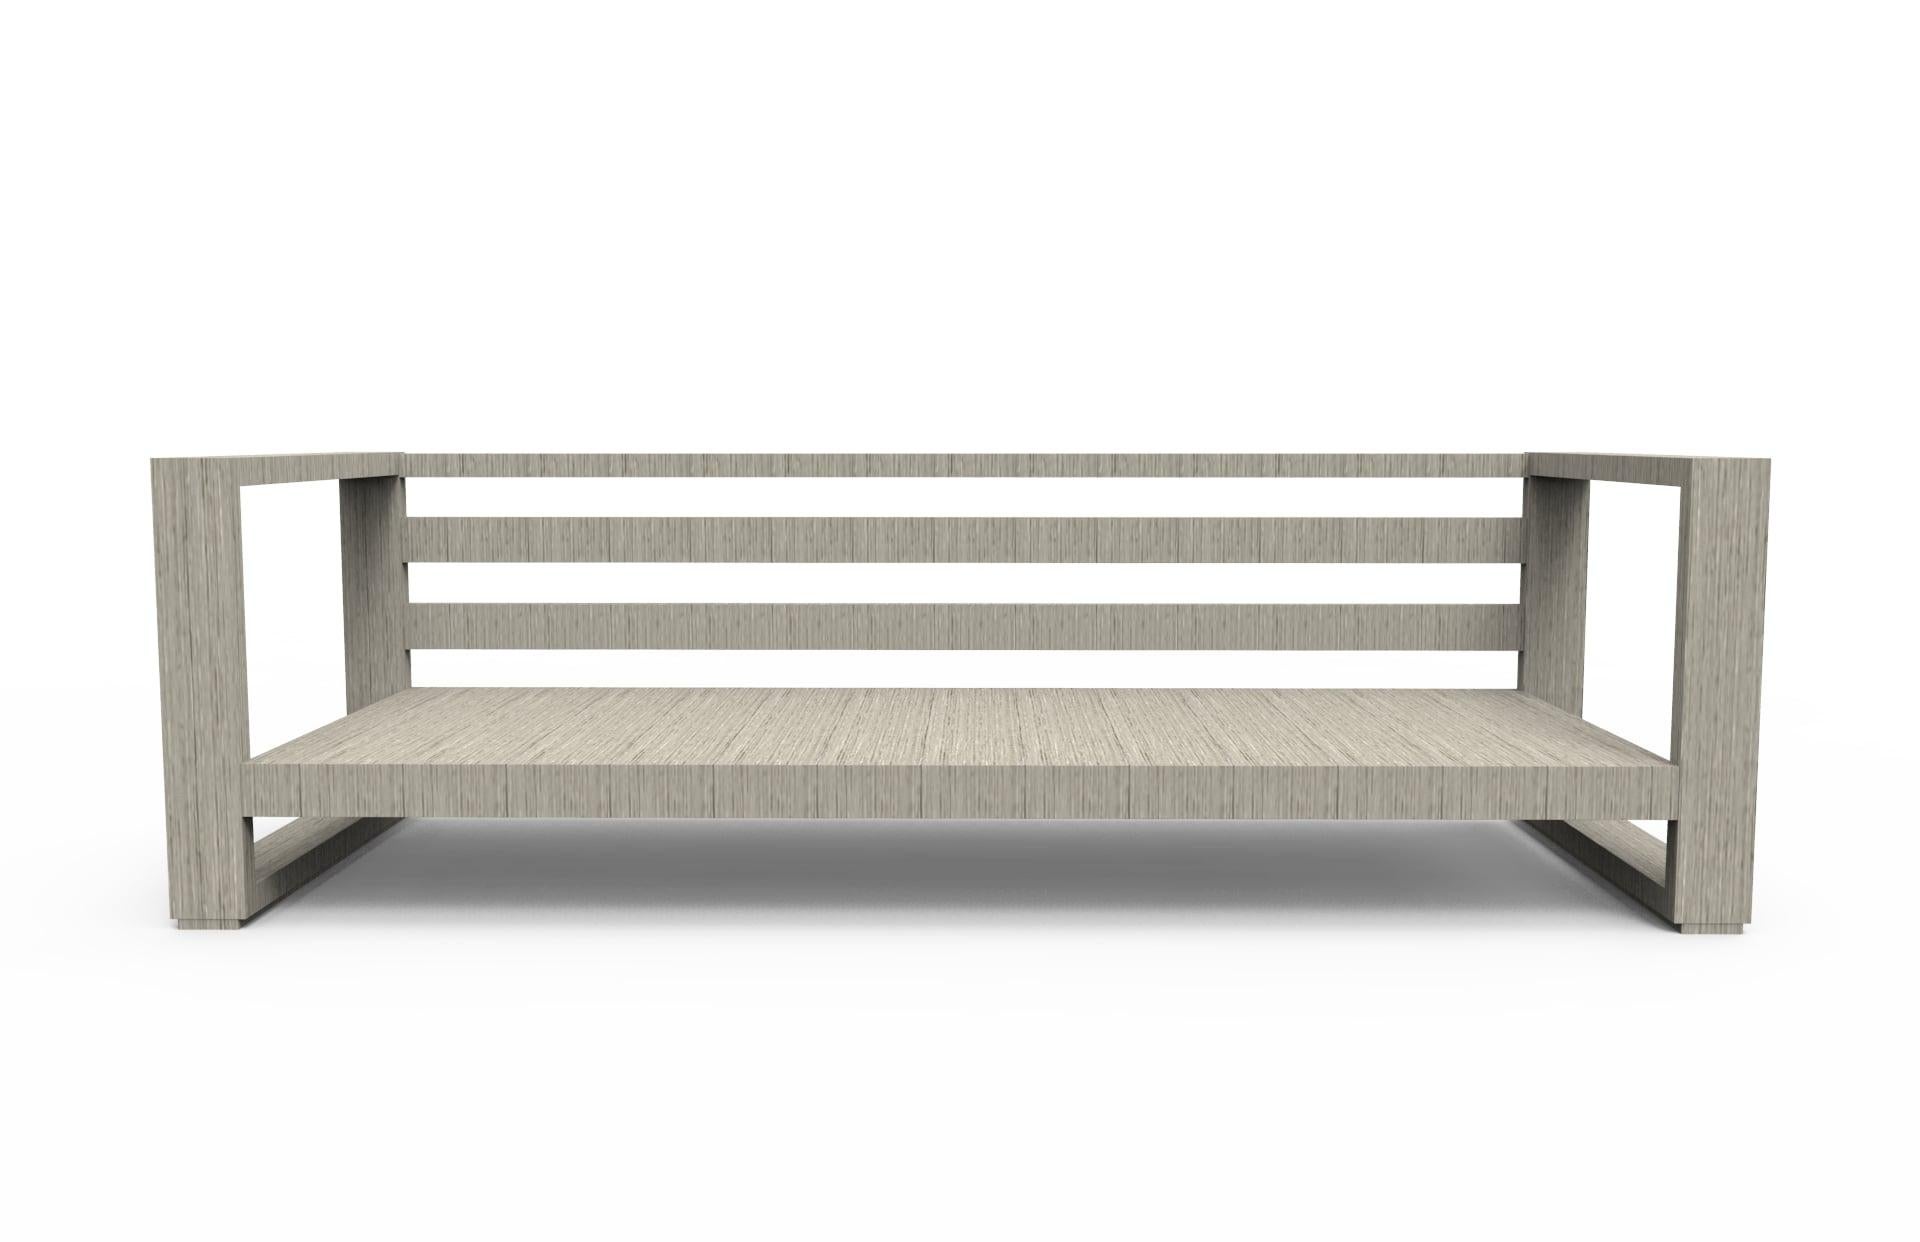 Philippine Brixton Teak Sofa 'Grade A': Wire Brushed Weathered Gray, Canvas Granite For Sale